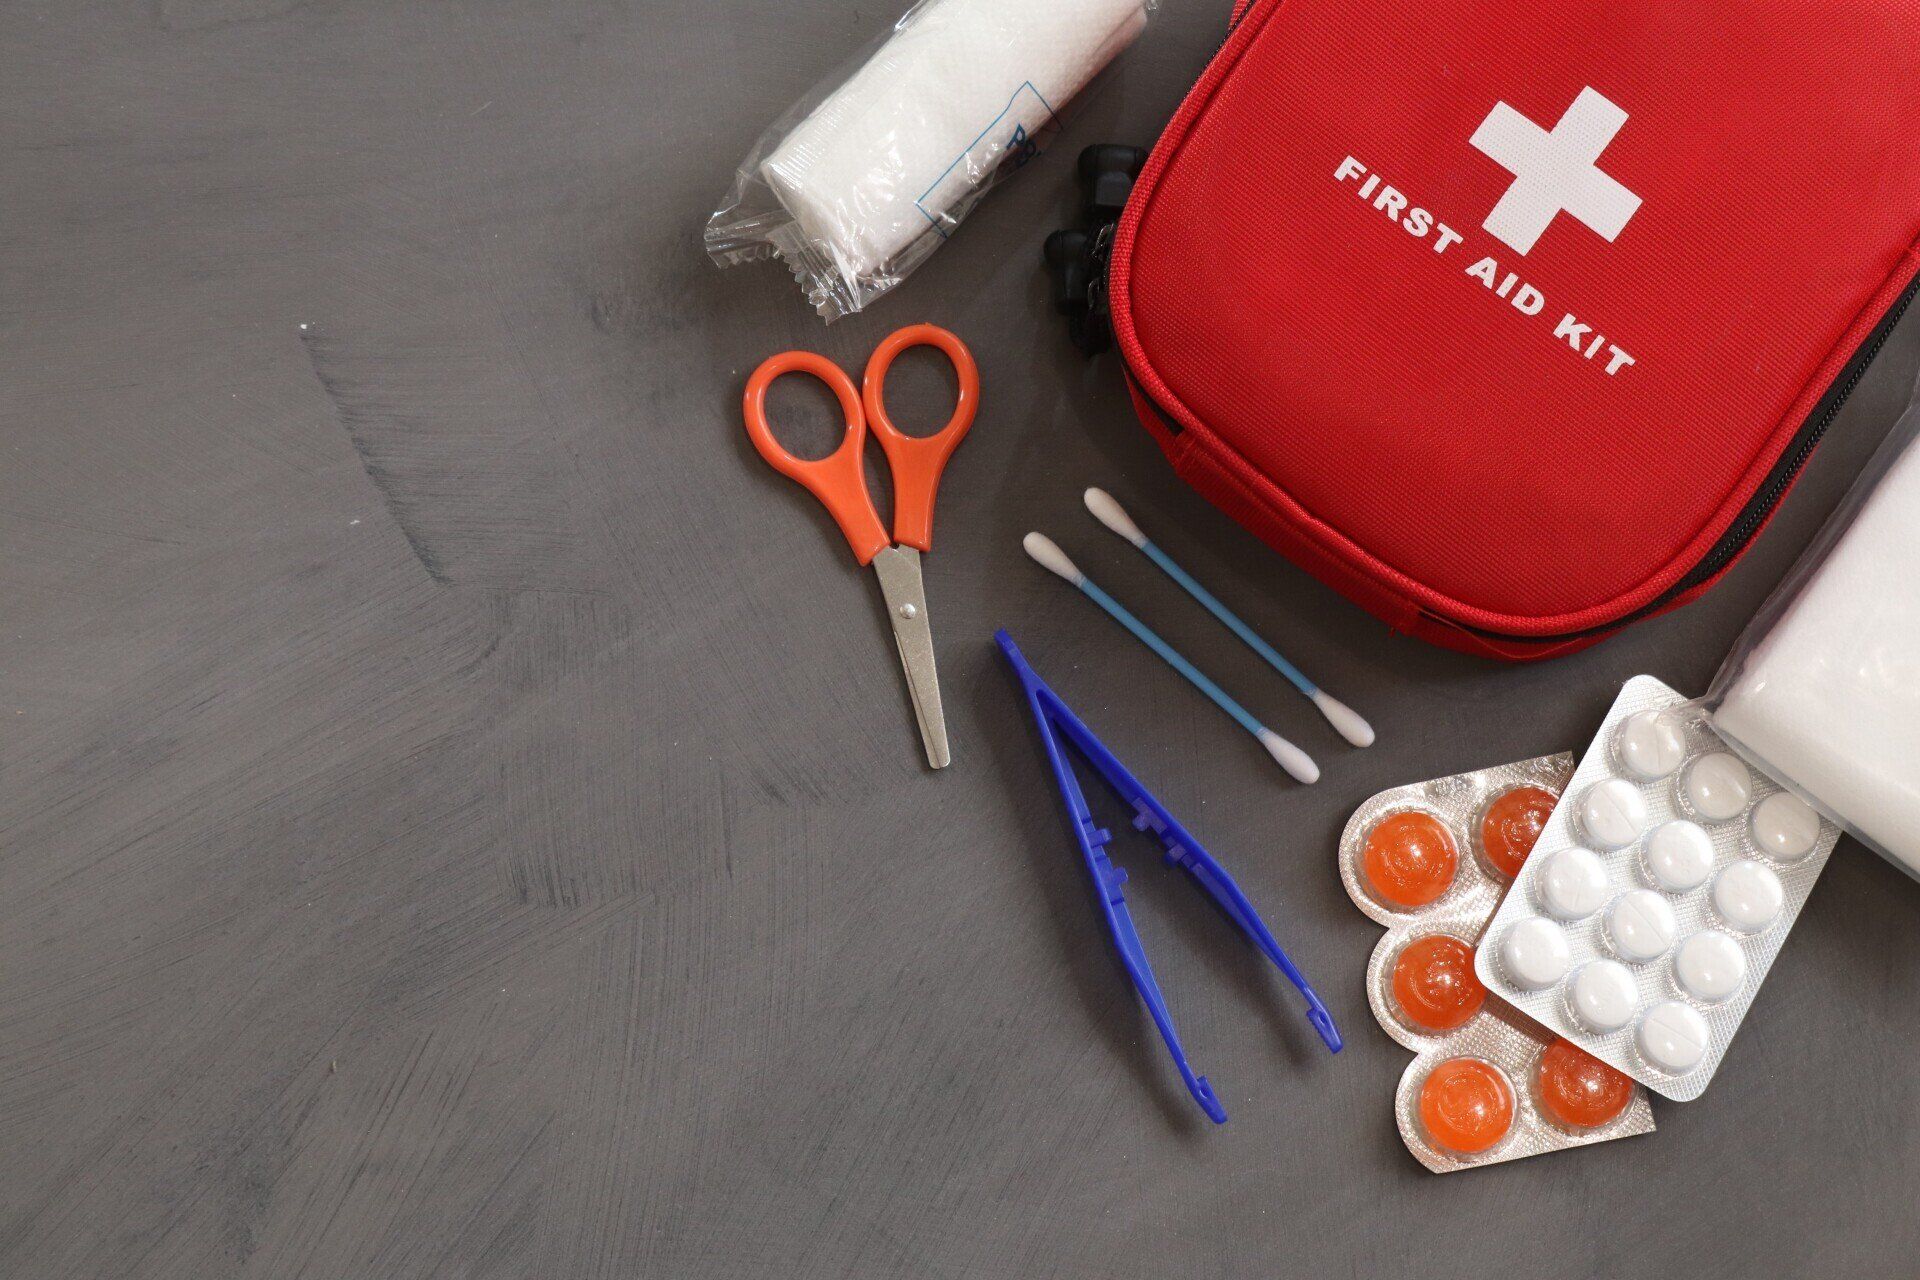 a red first aid kit is sitting on a gray surface .